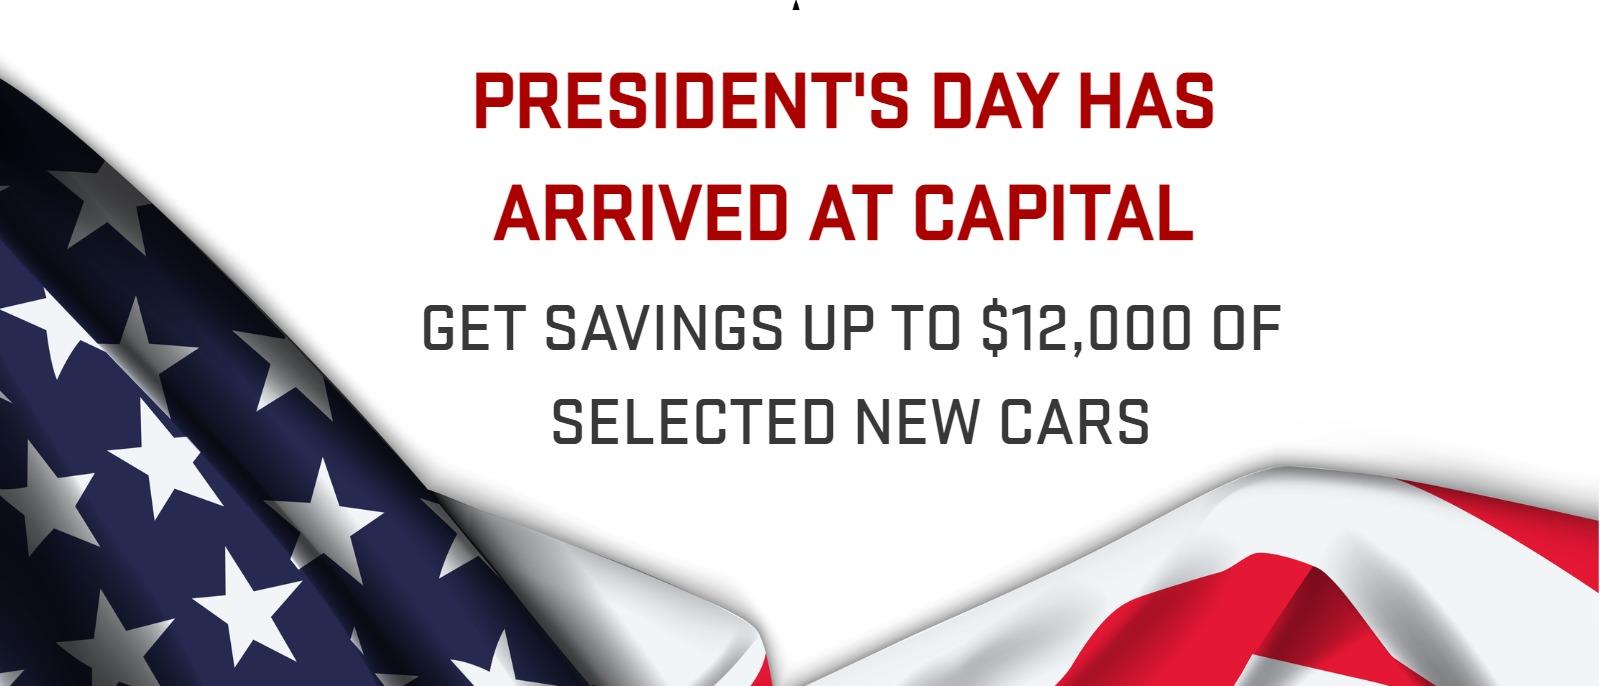 President's Day Has Arrived at Capital